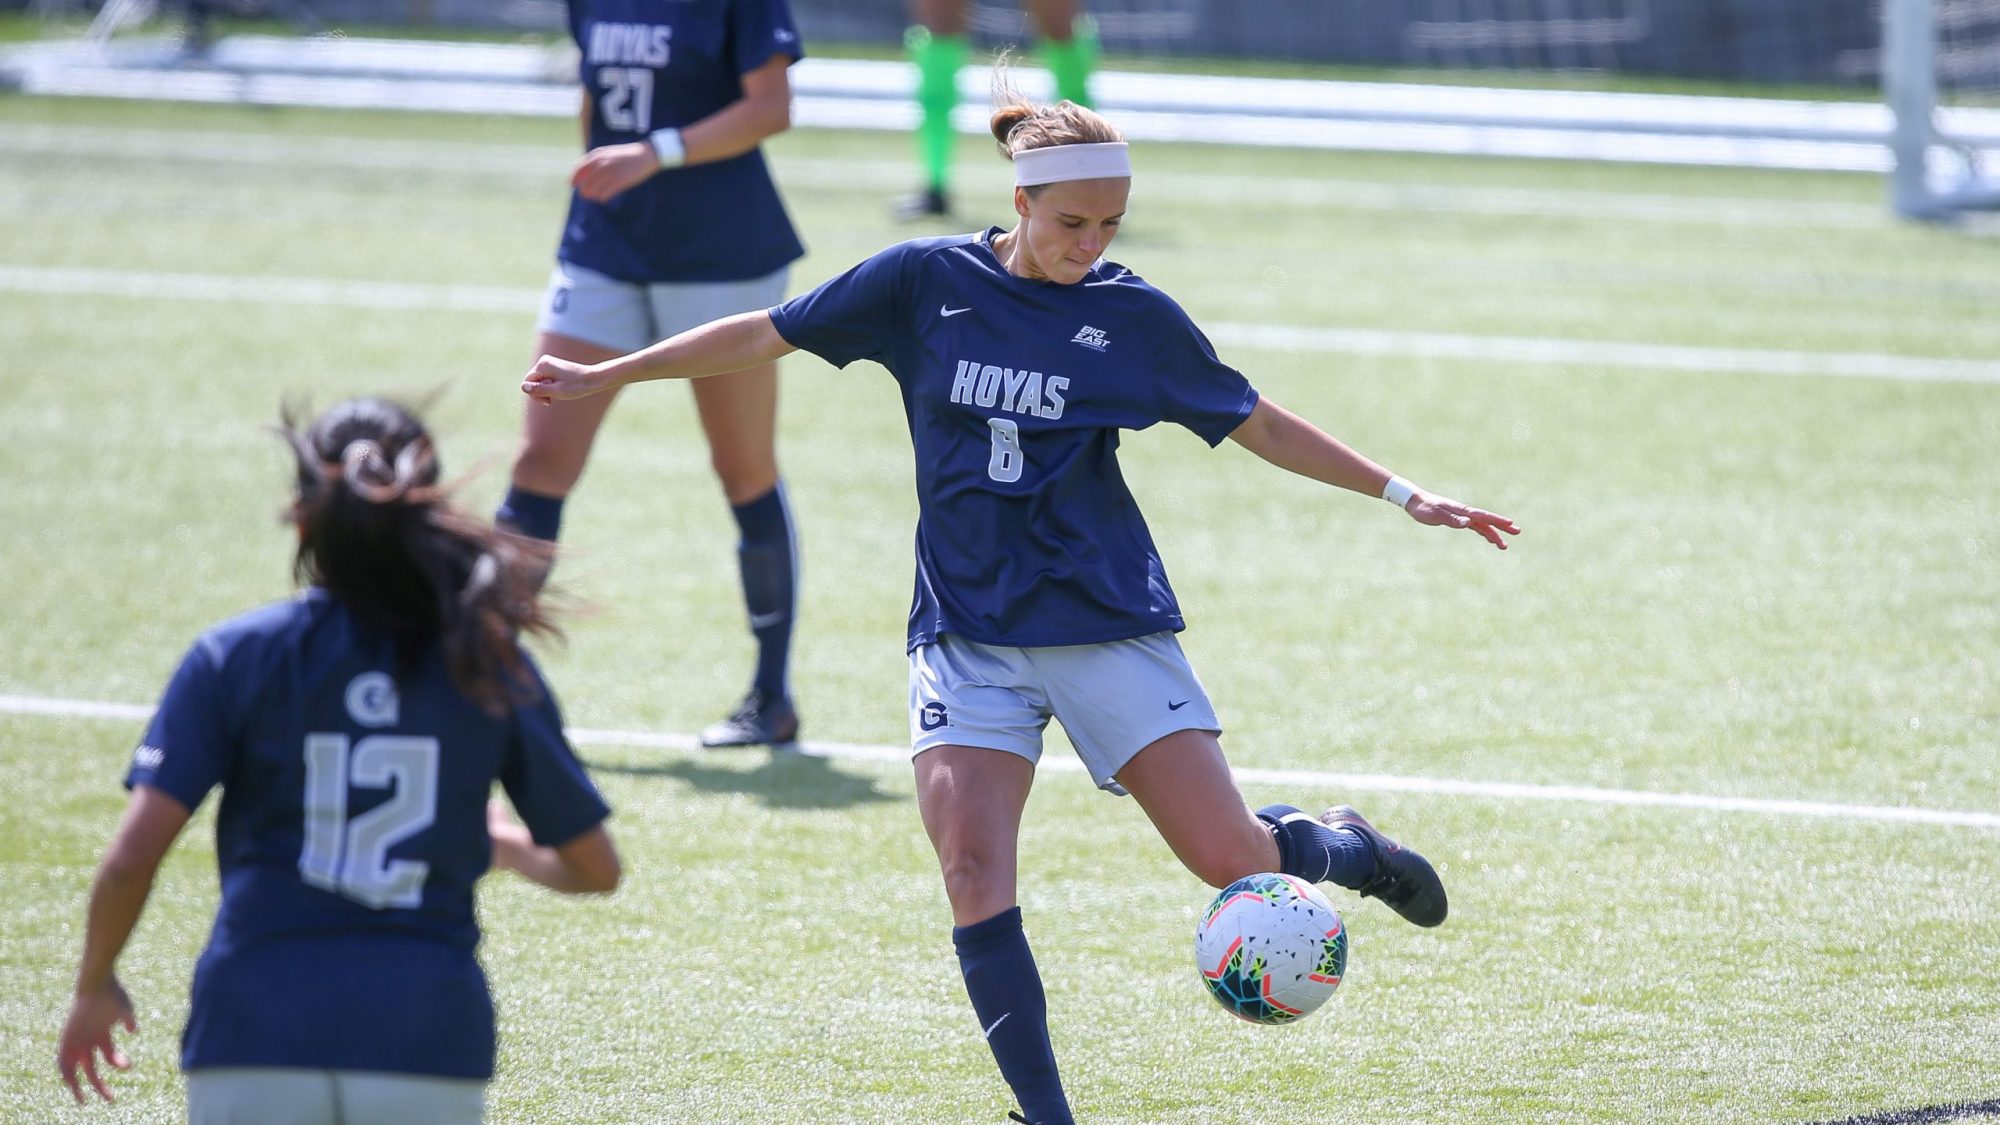 Daisy Cleverley plays soccer for Georgetown.